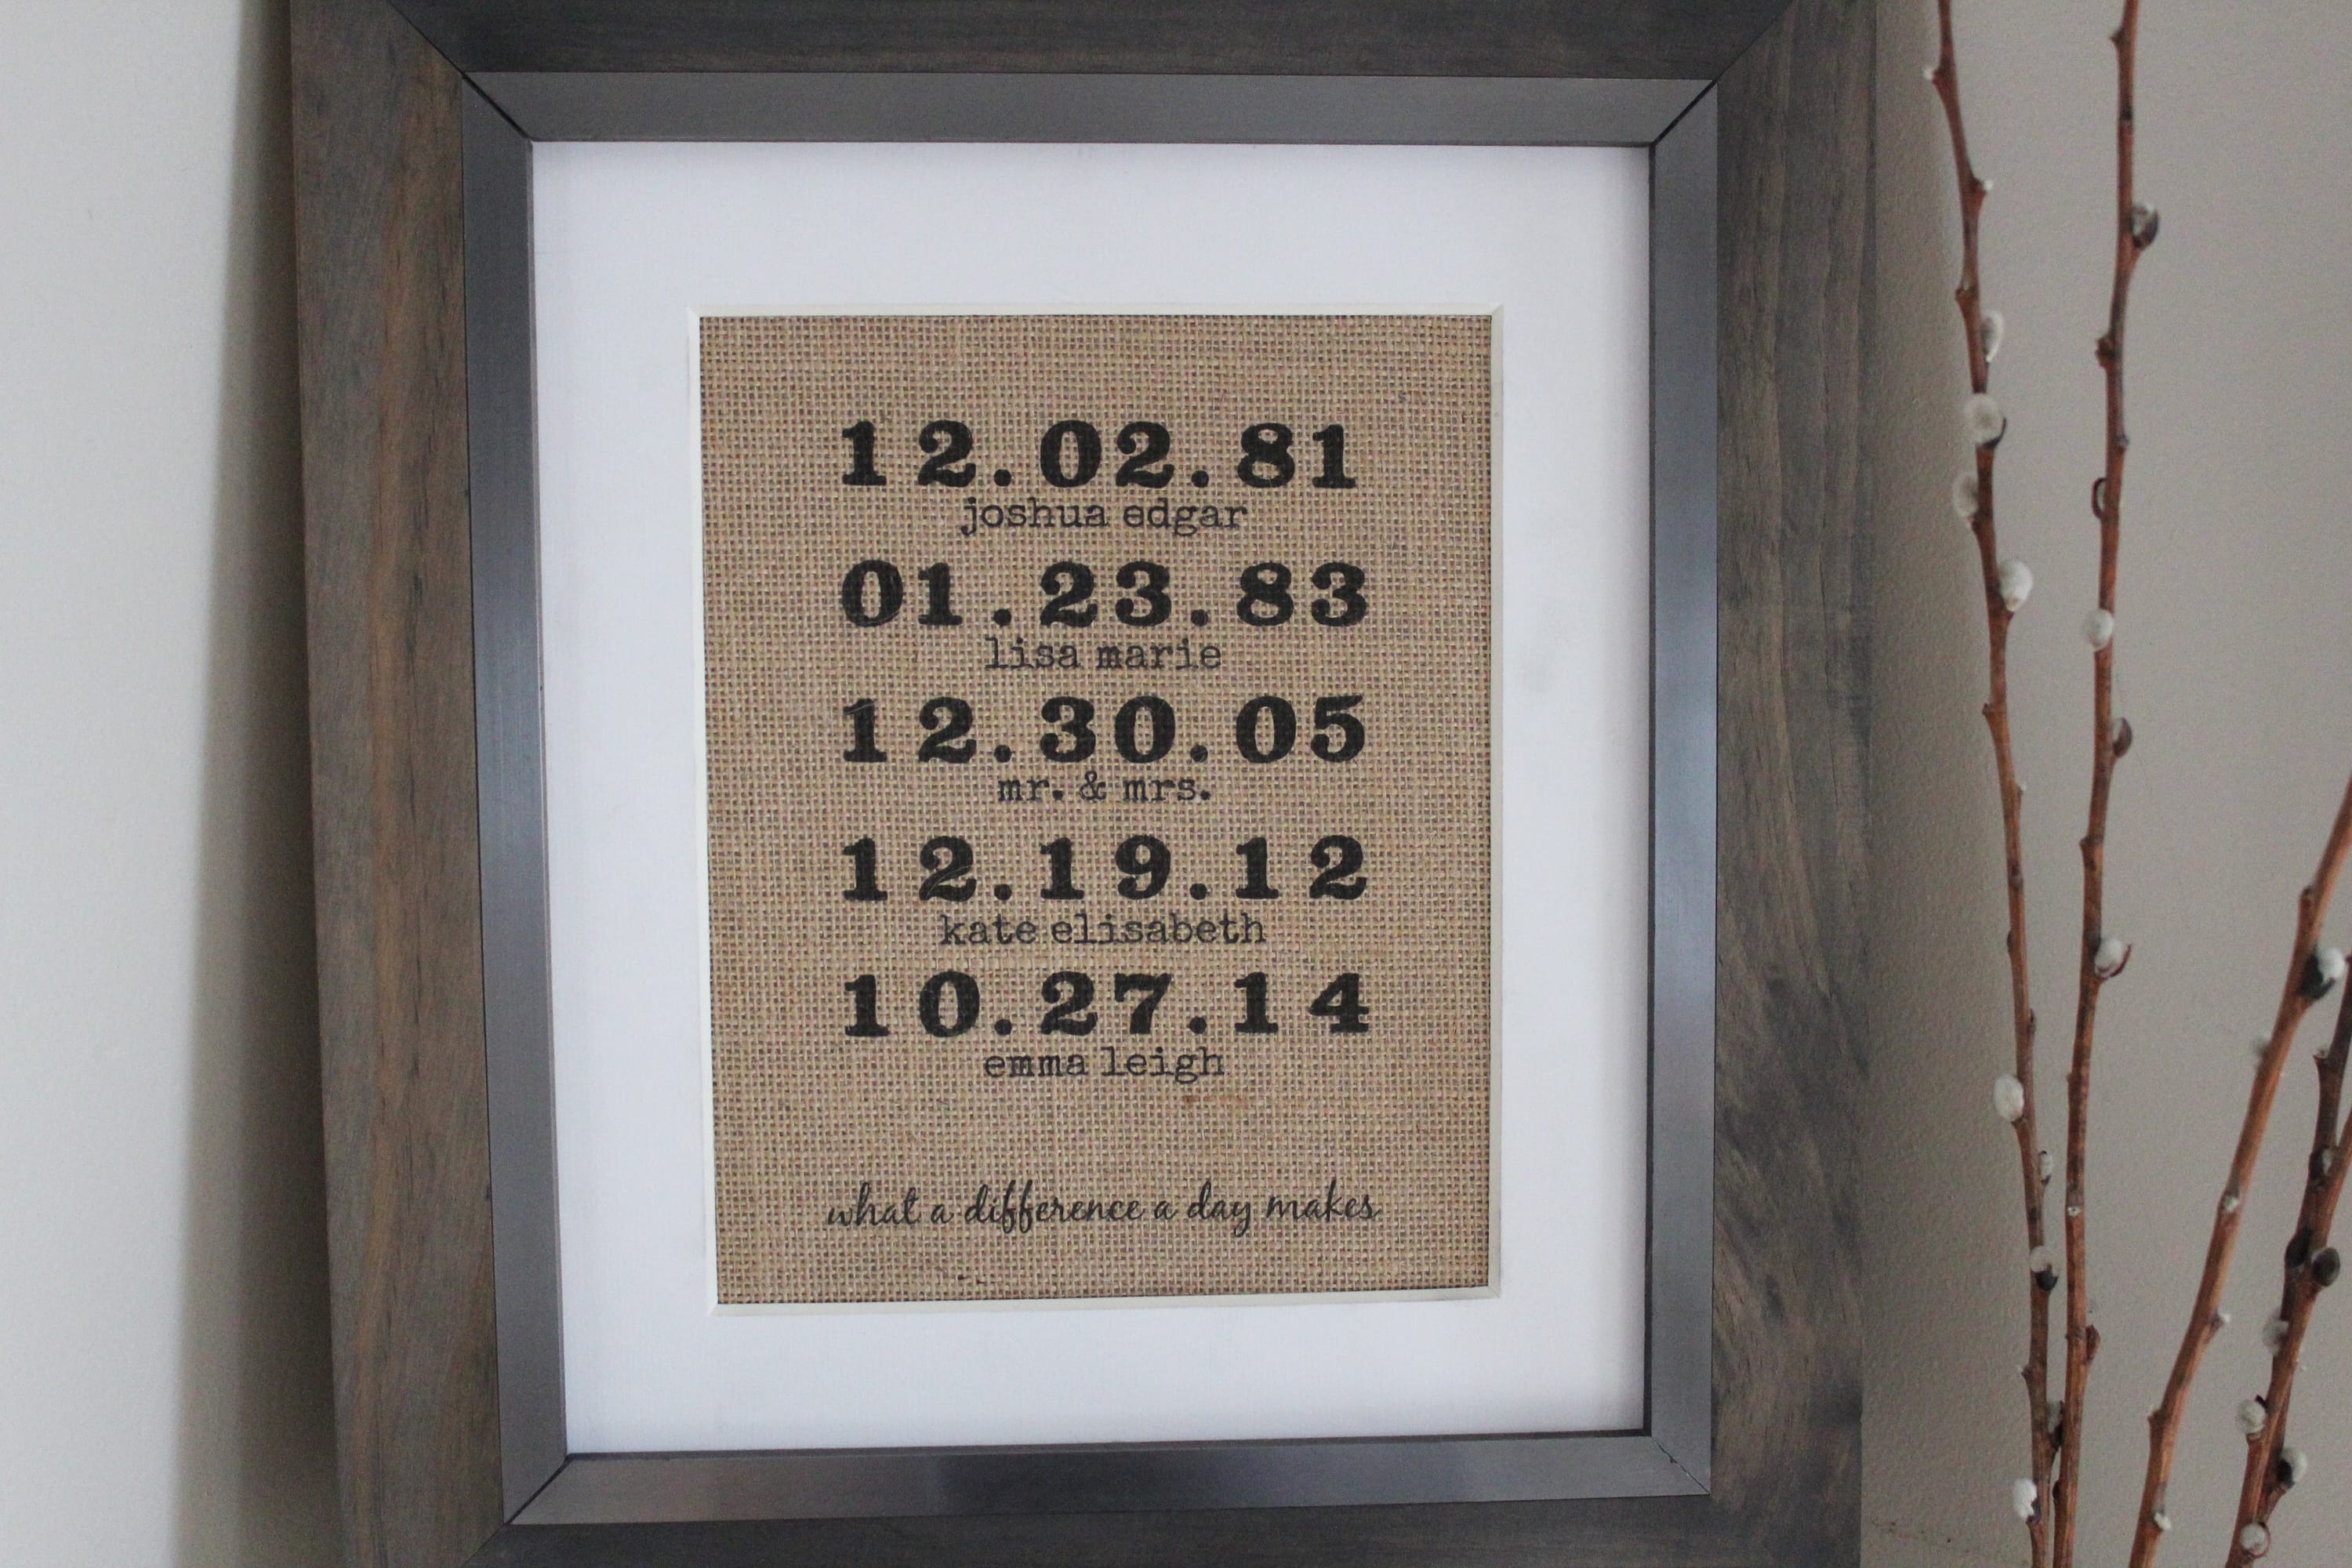 A burlap wall hanging, designed by Lisa Hathaway for the Etsy.com store Emma & the Bean, turns a family's dates of birth and wedding date into a piece of art. Items such as this one adds beauty to a home and serve as mementoes celebrating a family's history.